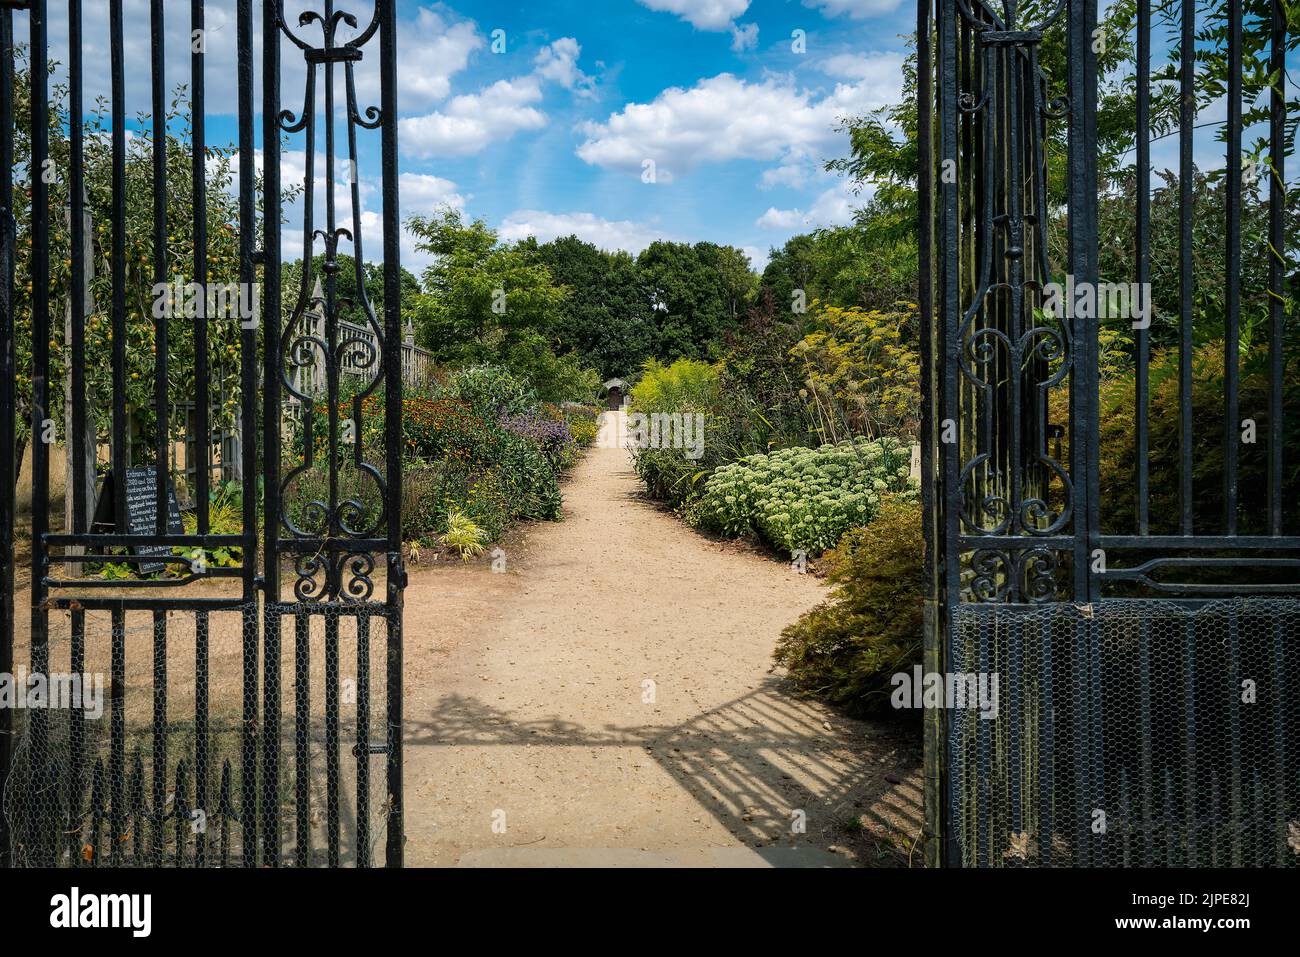 The entrance to the walled garden at parham House, Sussex Stock Photo